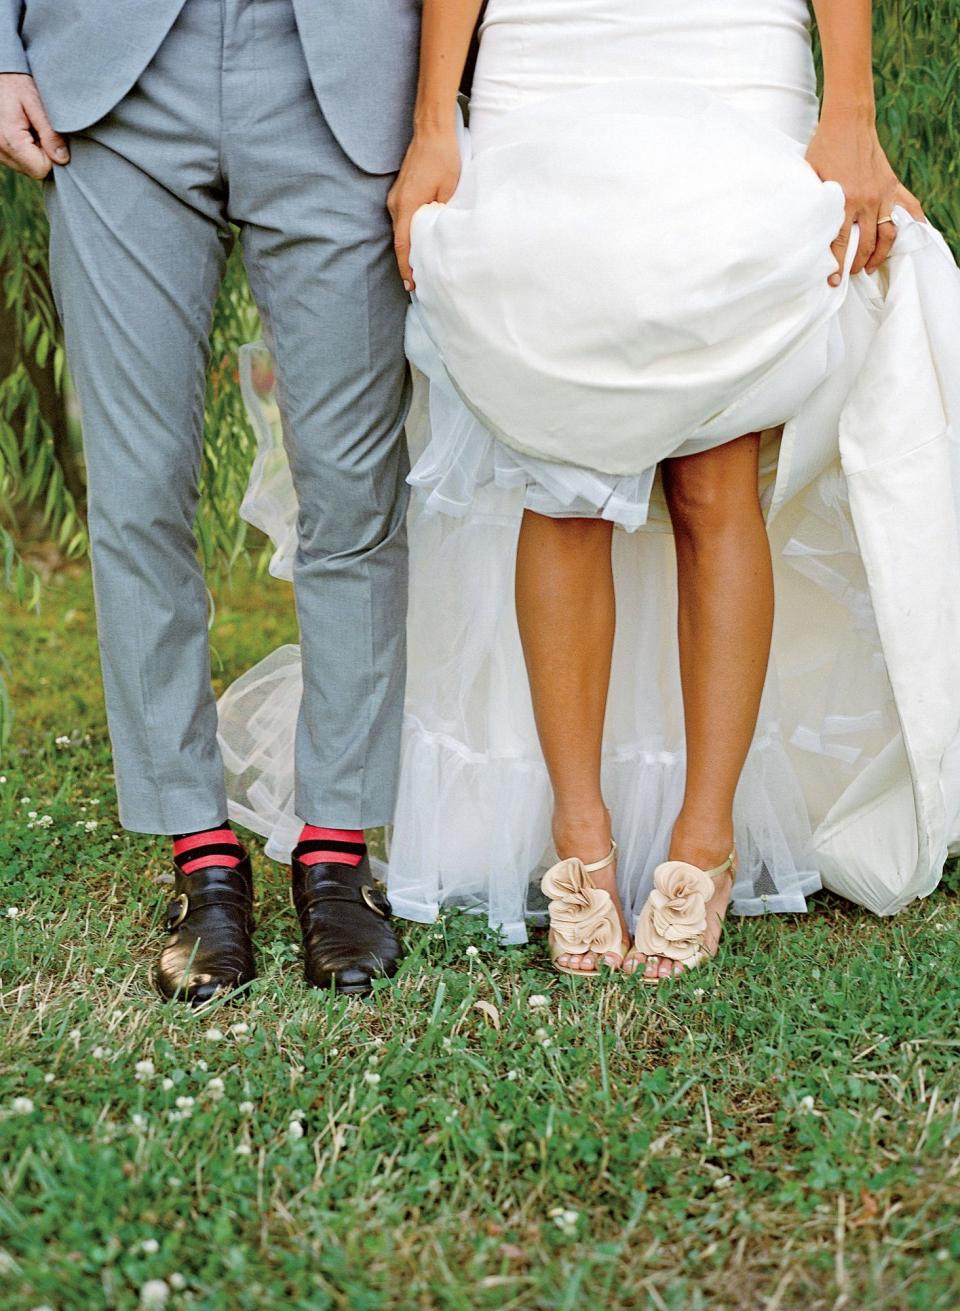 13 Comfortable Wedding Shoes for the Bride